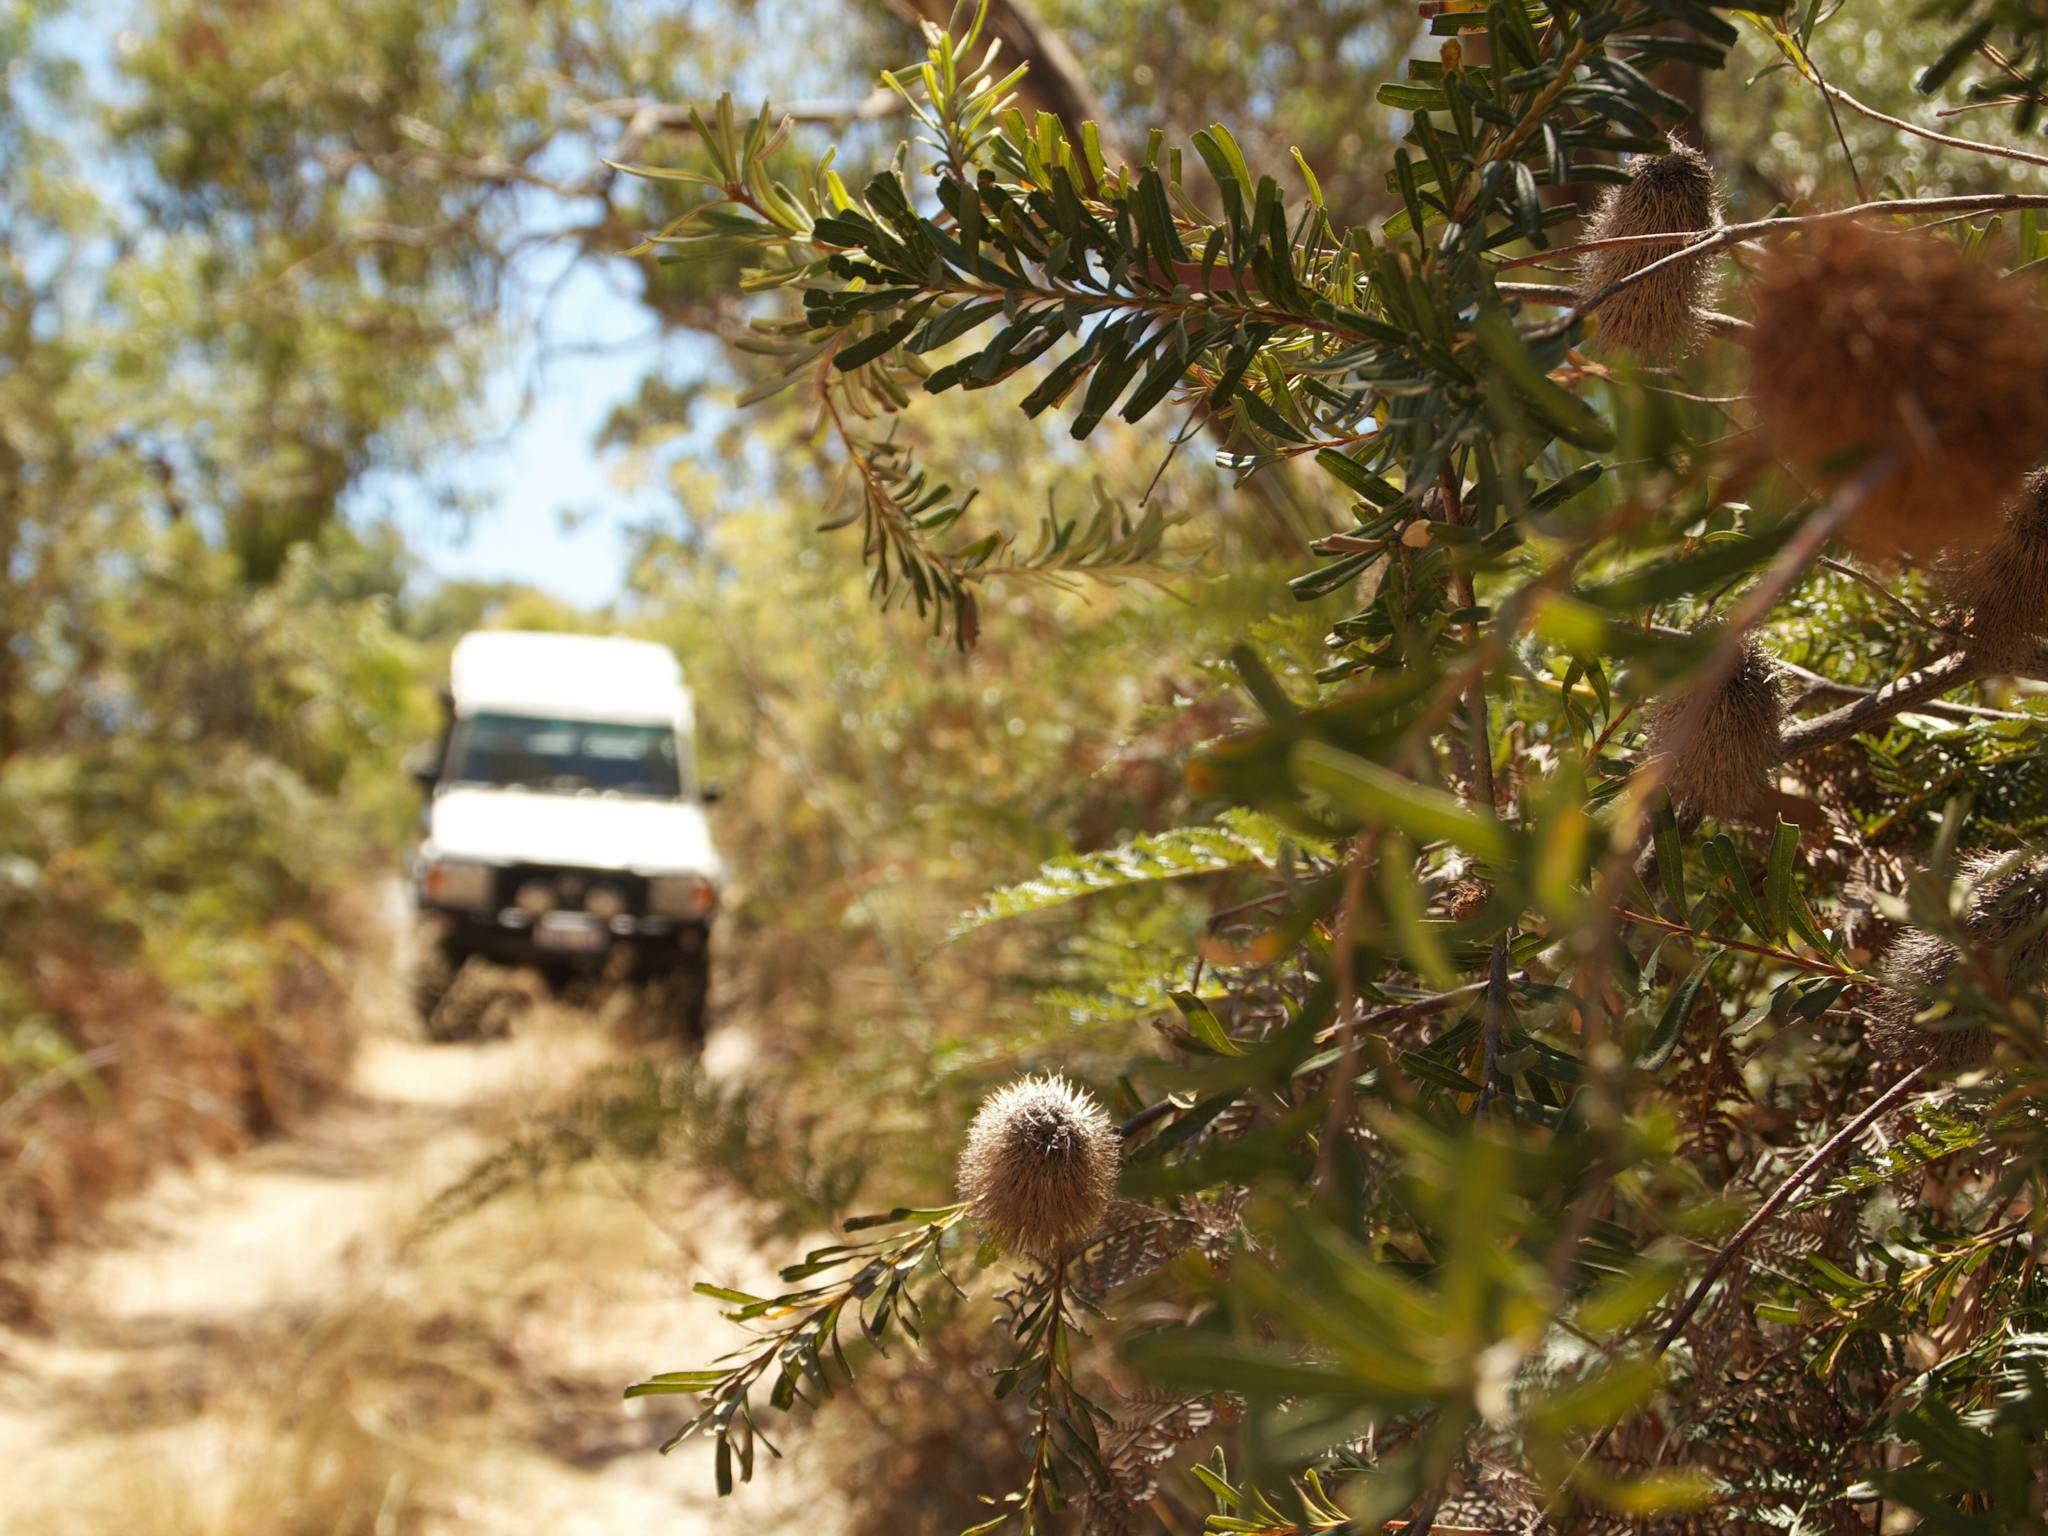 Thrilling off-road locations exclusive to Off Piste 4WD Tours